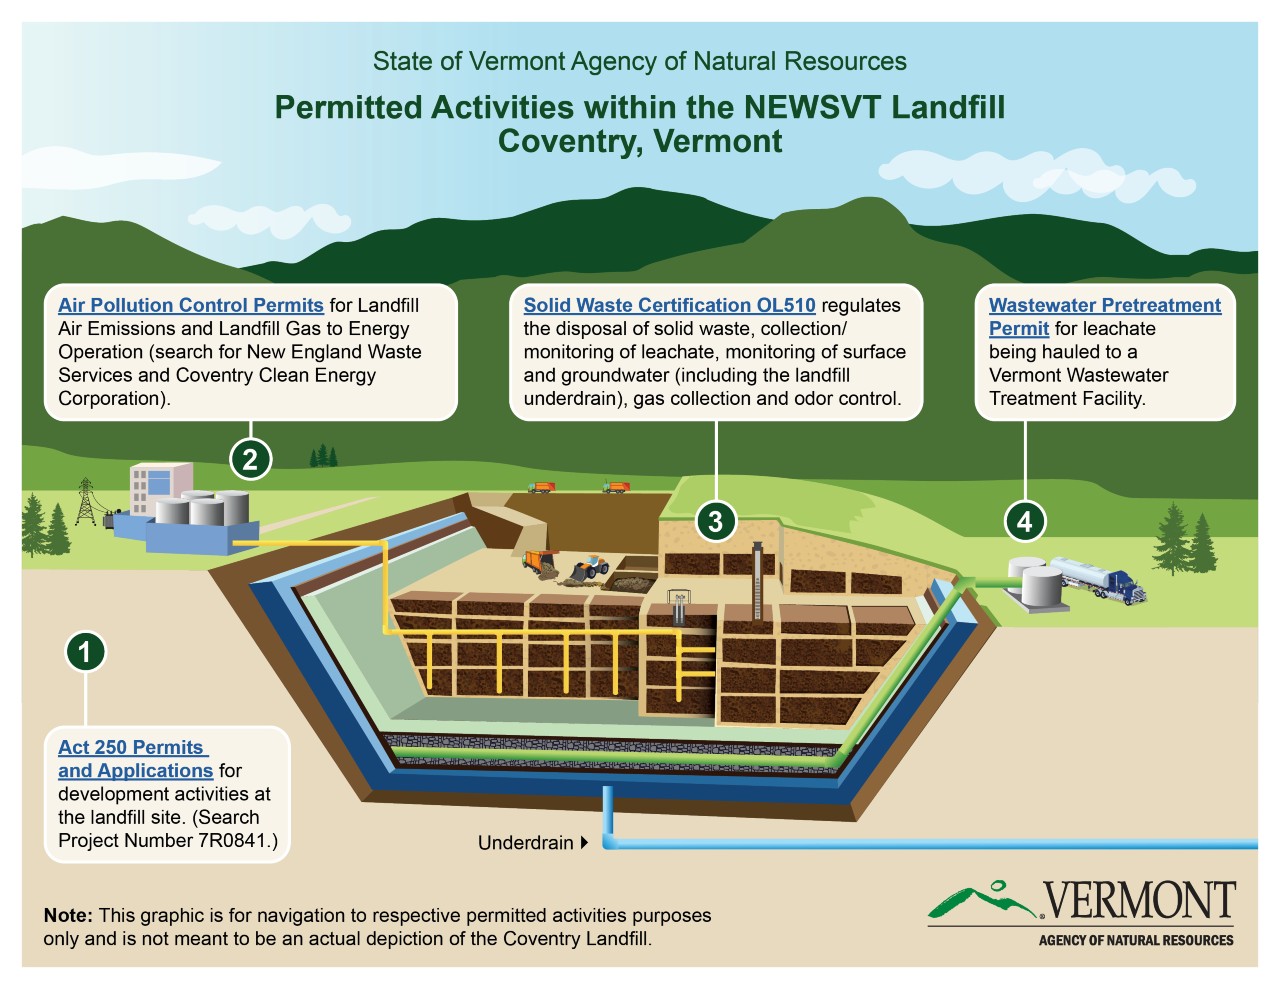 Illustrated cross-sectional view of a lined landfill describing the jurisdiction of Air Quality, Solid Waste, Wastewater and Act 250 permitting programs